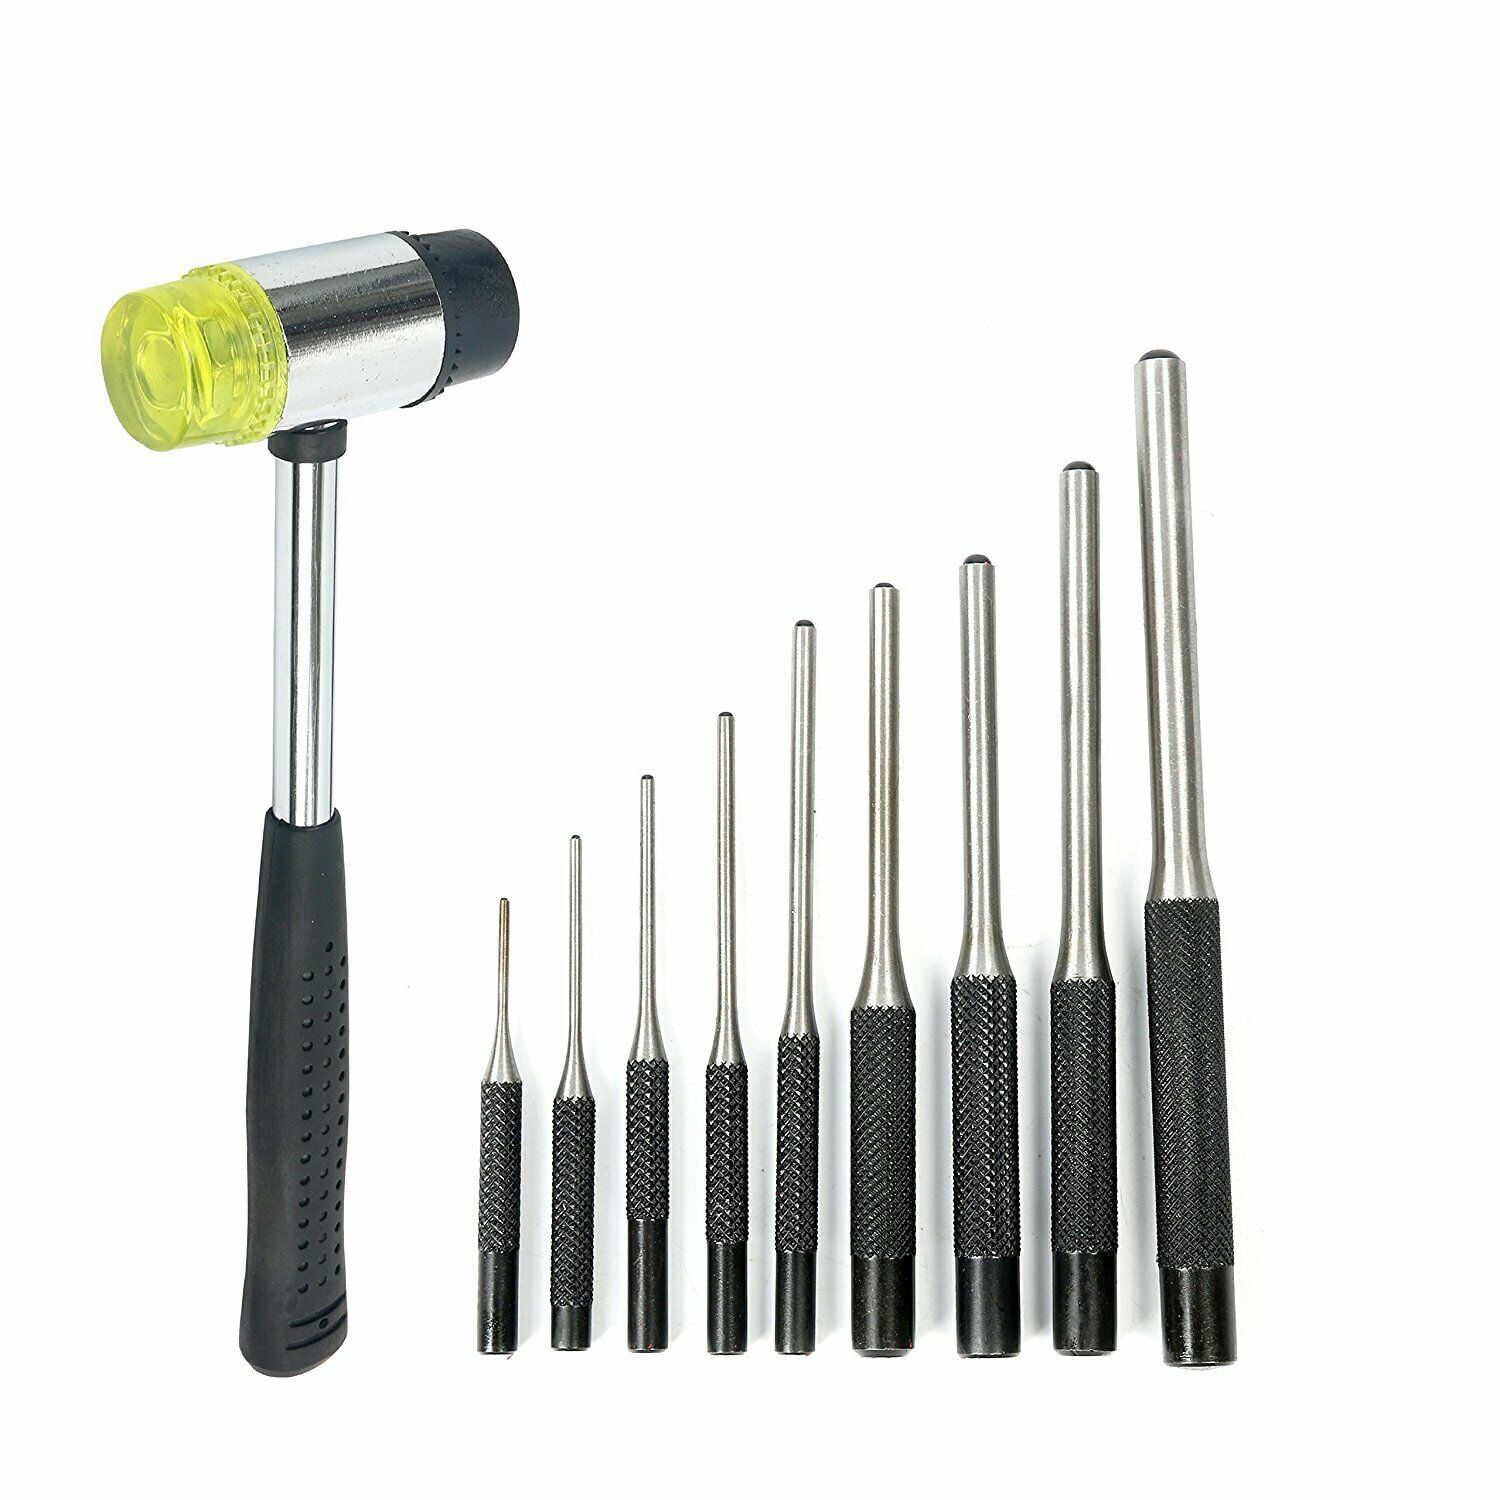 Hand Pin Remover Tool for Jewelers with 9 Roll Pin Punches 1 Double-End Hammer